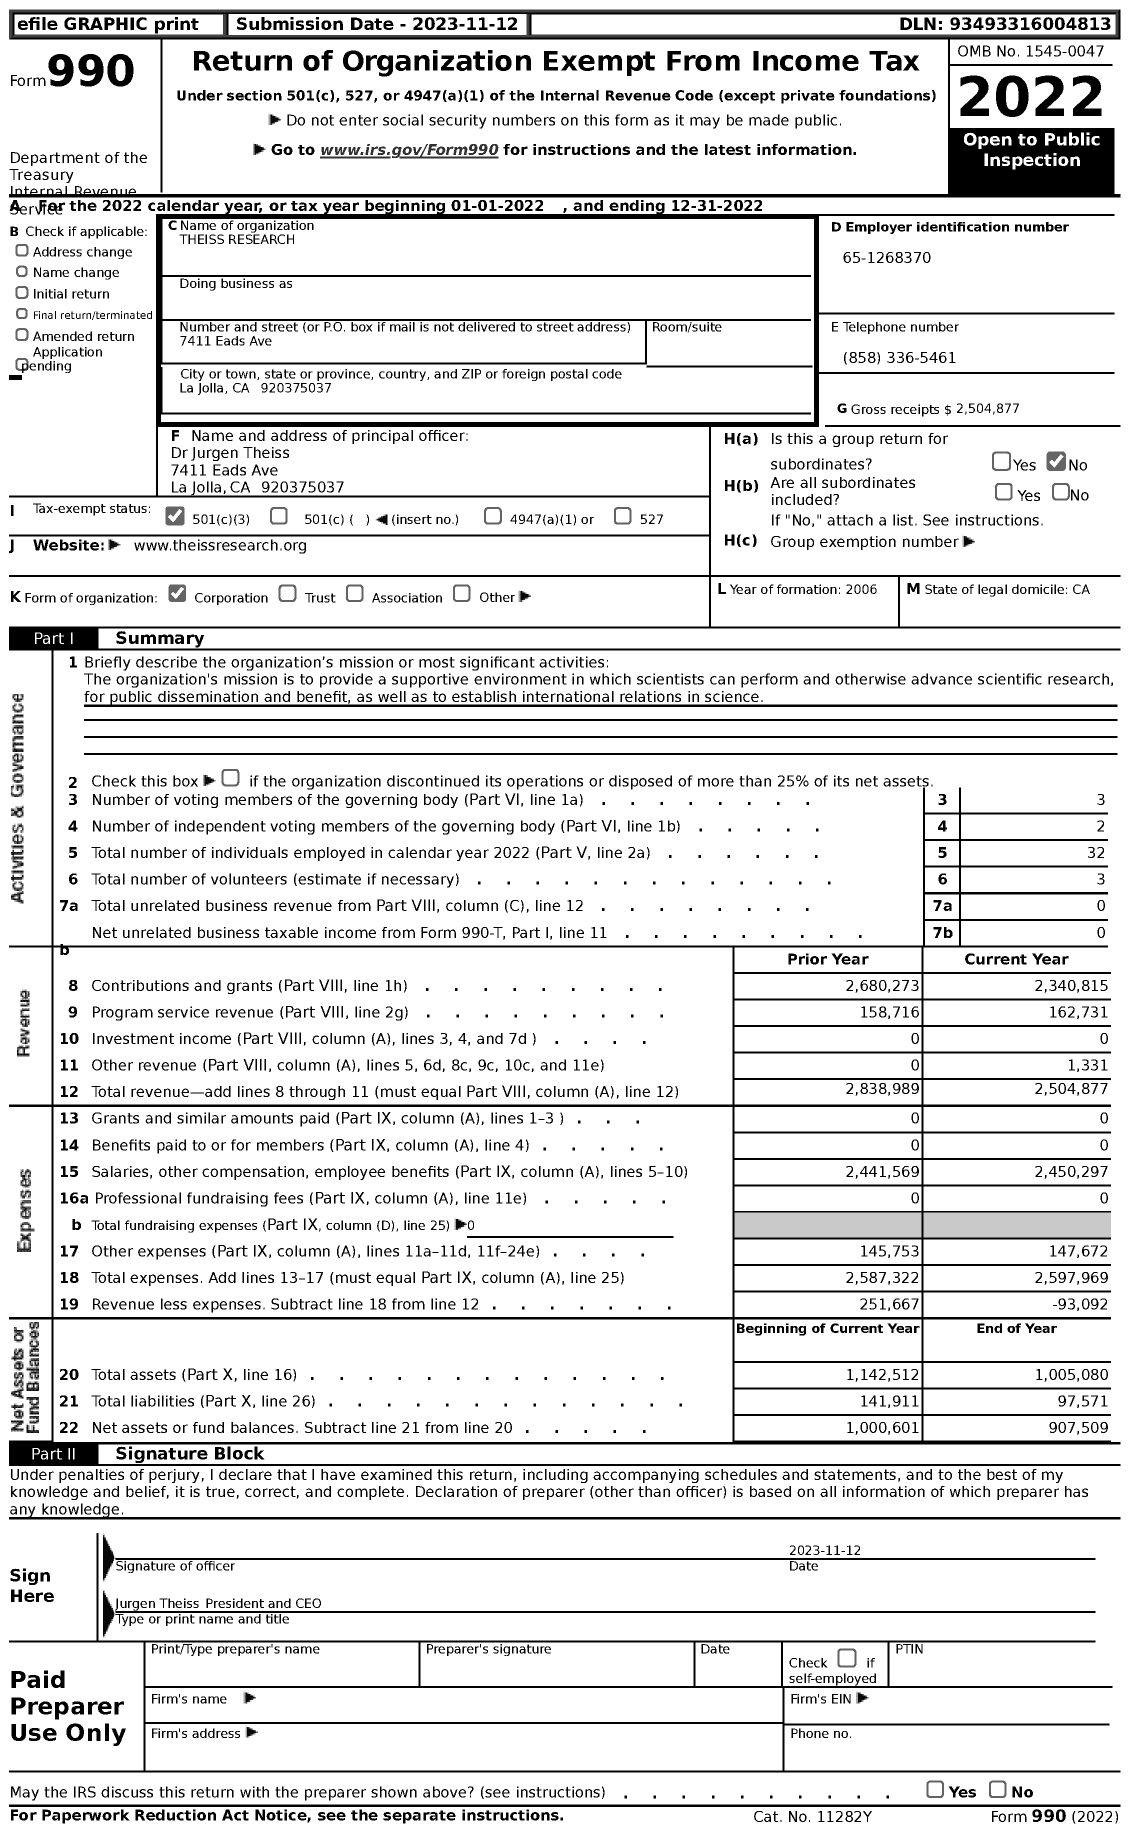 Image of first page of 2022 Form 990 for Theiss Research